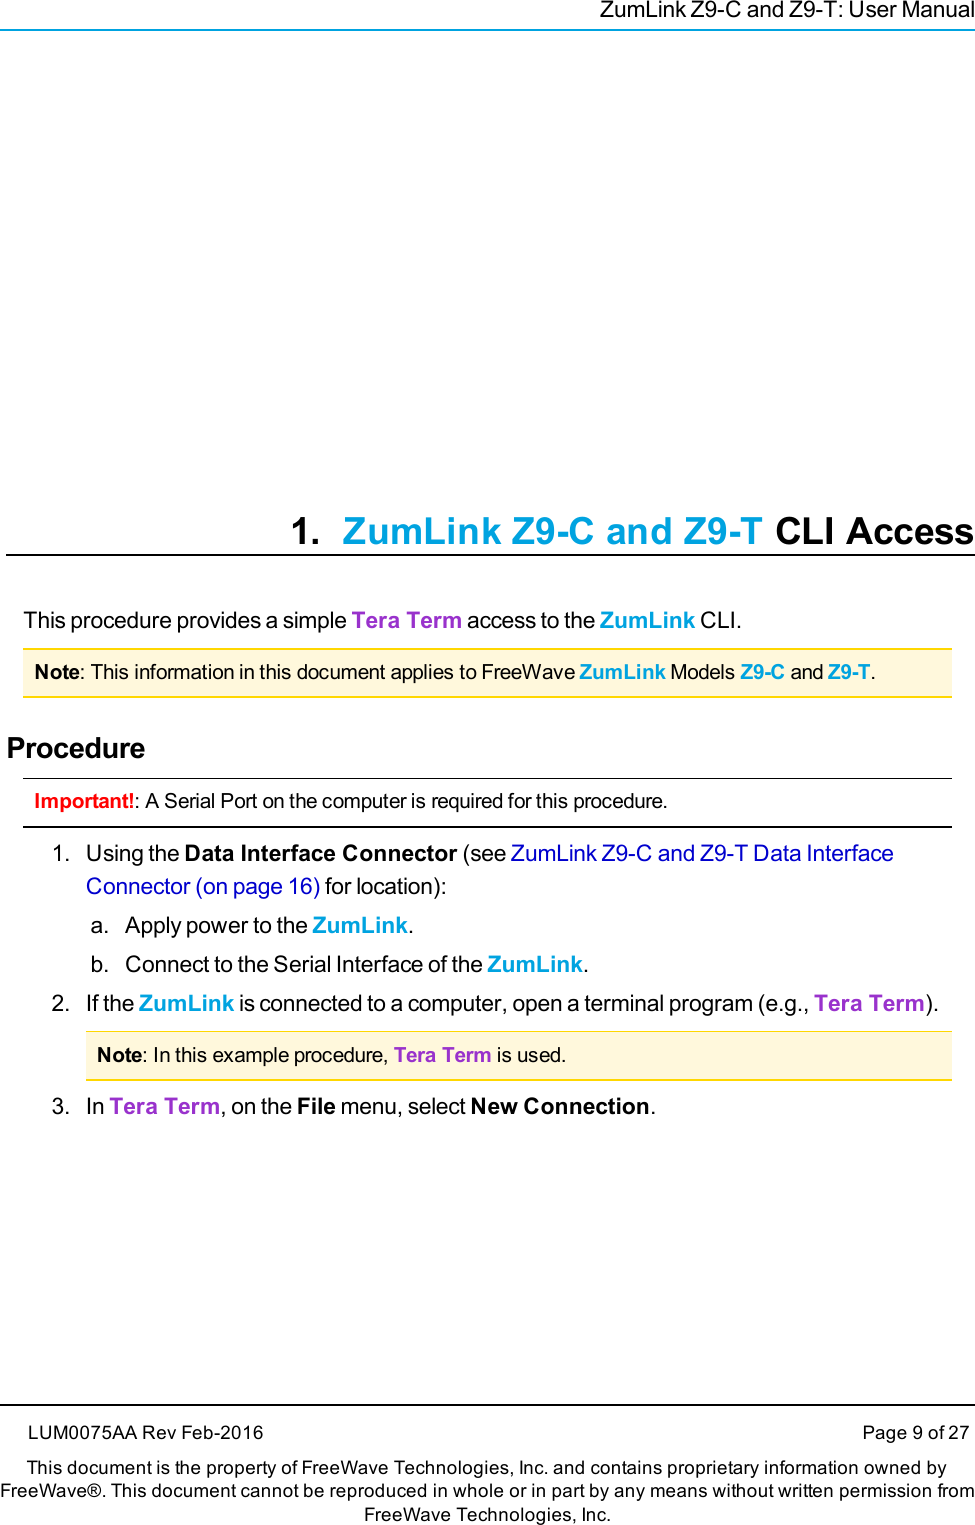 ZumLink Z9-C and Z9-T: User Manual1. ZumLink Z9-C and Z9-T CLI AccessThis procedure provides a simple Tera Term access to the ZumLink CLI.Note: This information in this document applies to FreeWave ZumLink Models Z9-C and Z9-T.ProcedureImportant!: A Serial Port on the computer is required for this procedure.1. Using the Data Interface Connector (see ZumLink Z9-C and Z9-T Data InterfaceConnector (on page 16) for location):a. Apply power to the ZumLink.b. Connect to the Serial Interface of the ZumLink.2. If the ZumLink is connected to a computer, open a terminal program (e.g., Tera Term).Note: In this example procedure, Tera Term is used.3. In Tera Term, on the File menu, select New Connection.LUM0075AA Rev Feb-2016 Page 9 of 27This document is the property of FreeWave Technologies, Inc. and contains proprietary information owned byFreeWave®. This document cannot be reproduced in whole or in part by any means without written permission fromFreeWave Technologies, Inc.